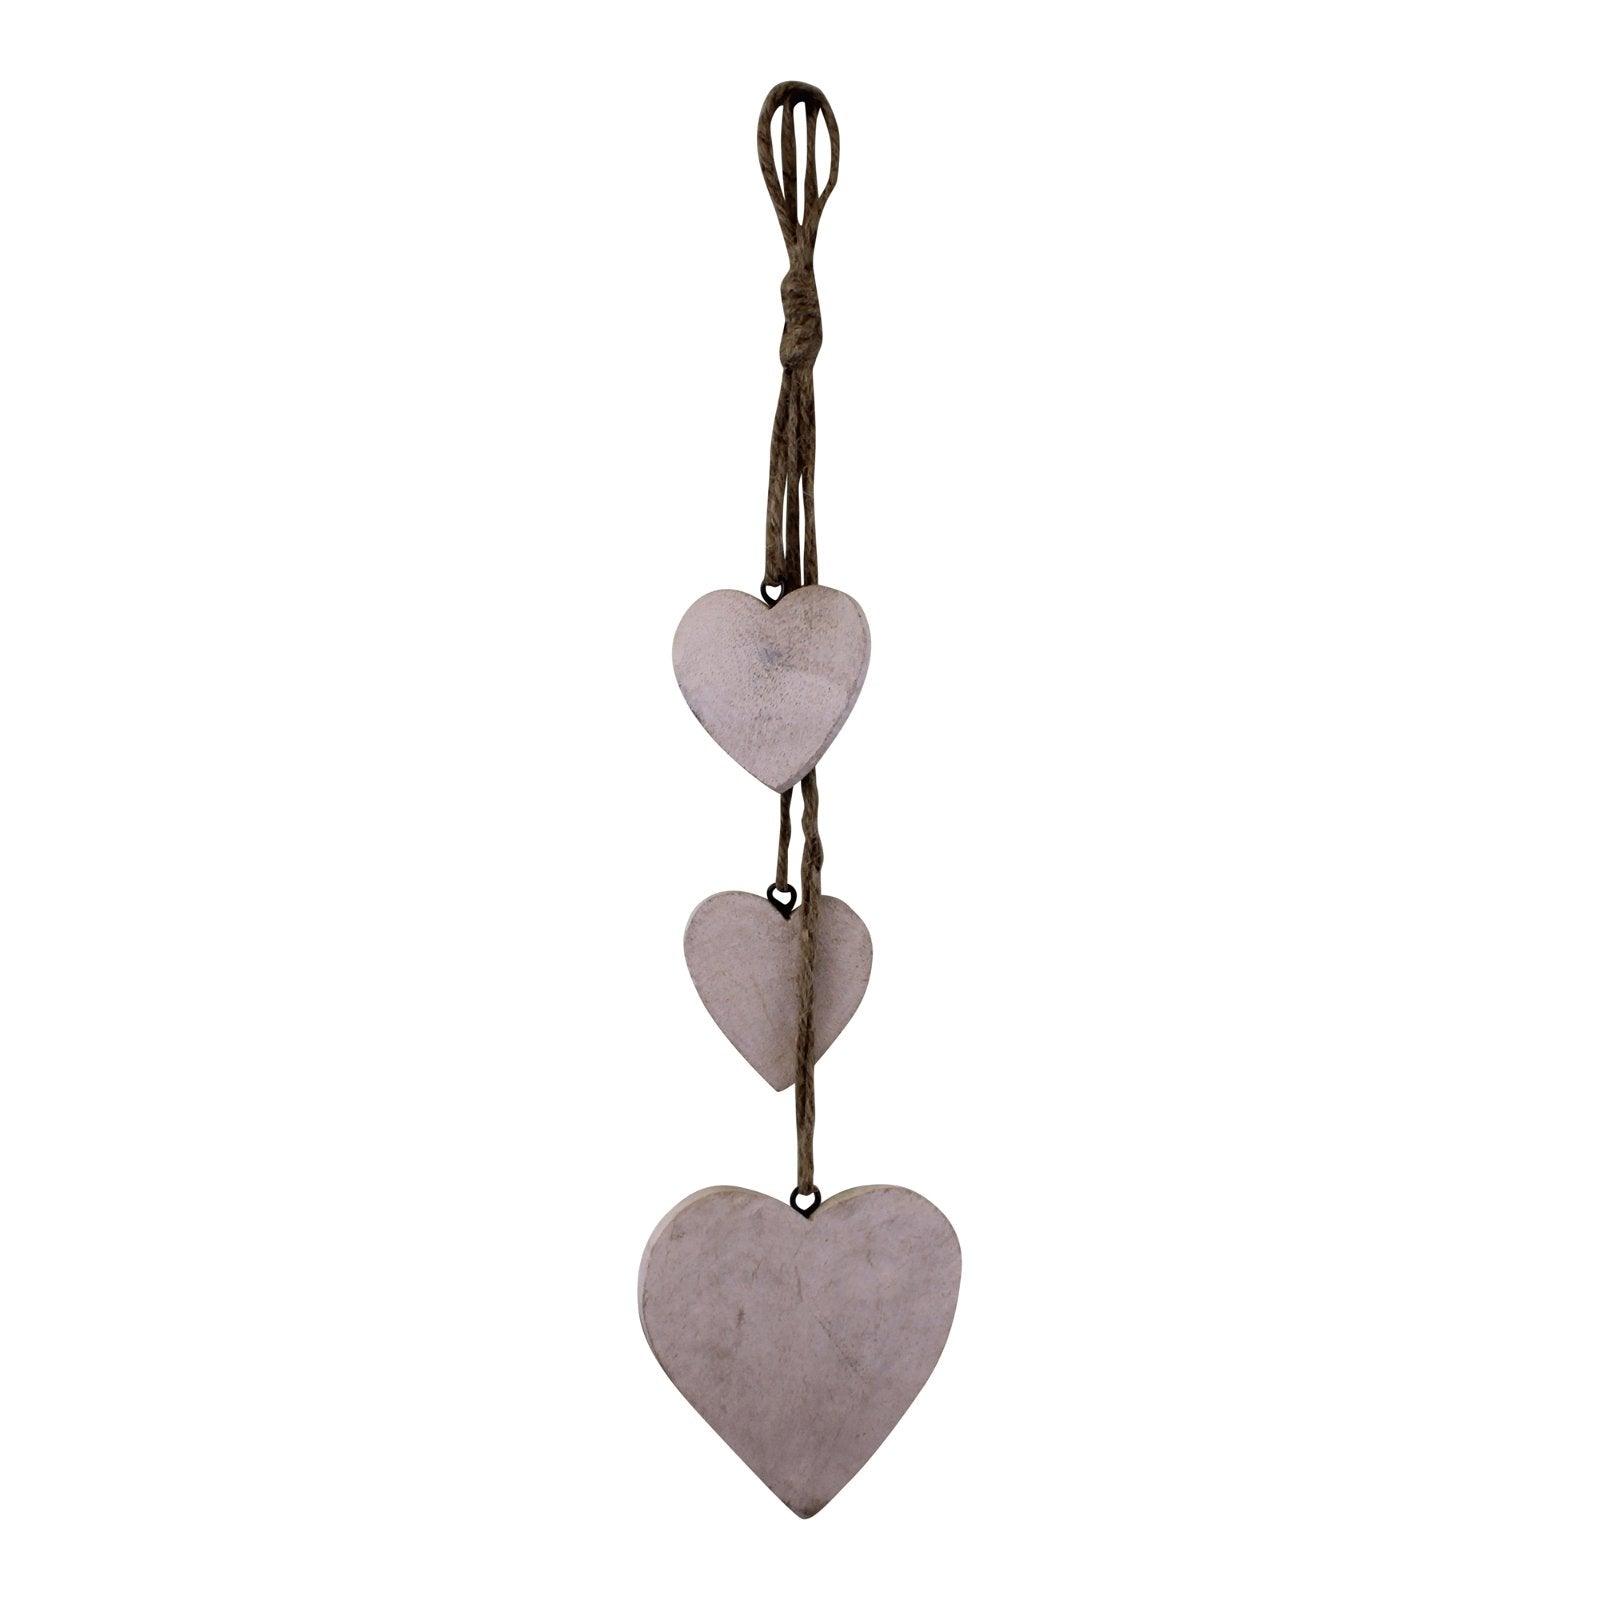 View Three Hanging Wooden Heart Decoration Light Wood information